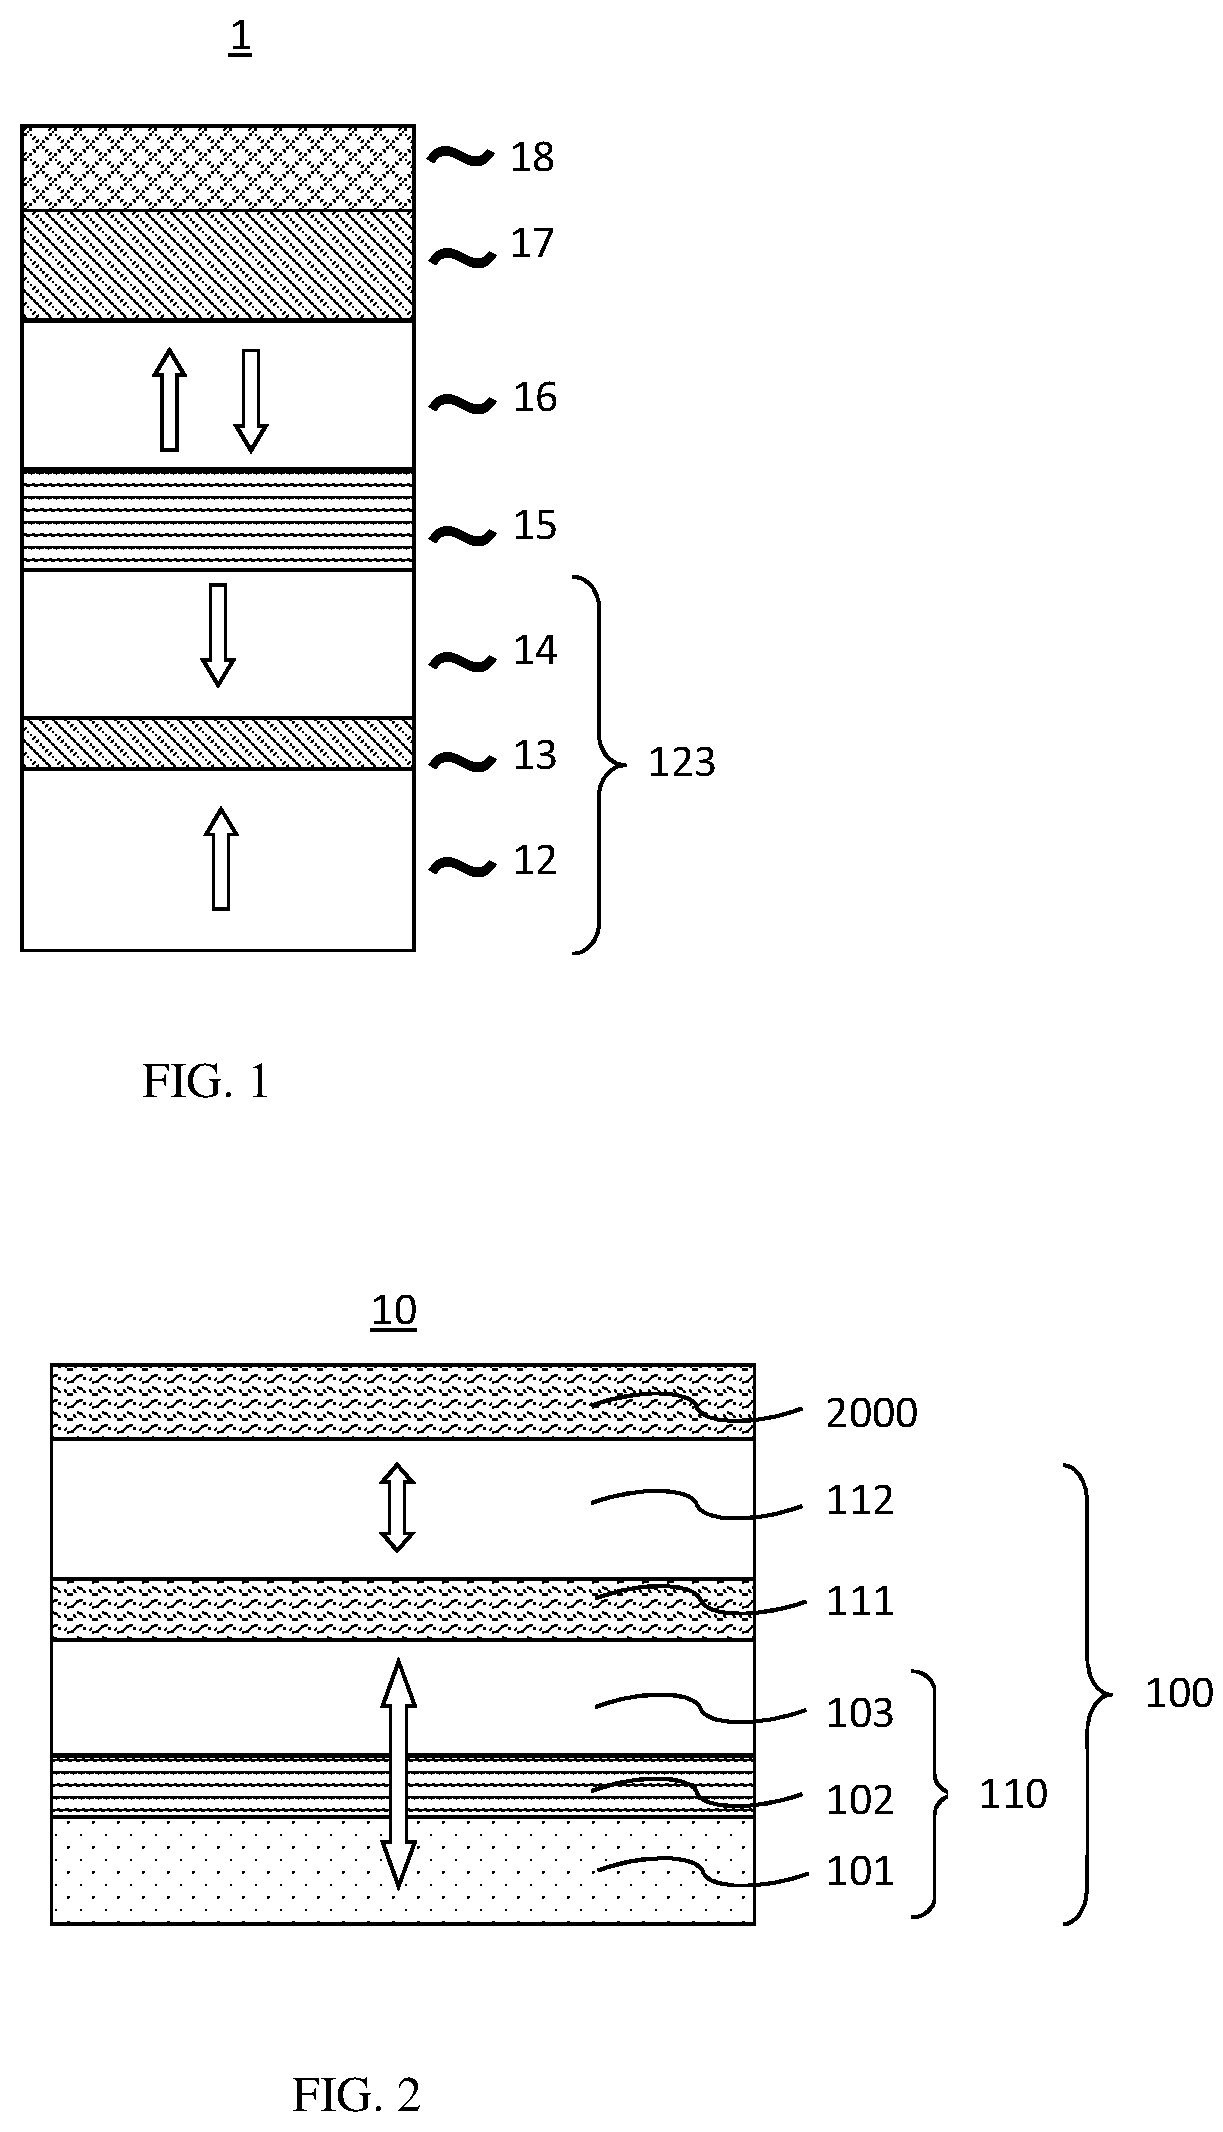 Composite recording structure for an improved write profermance